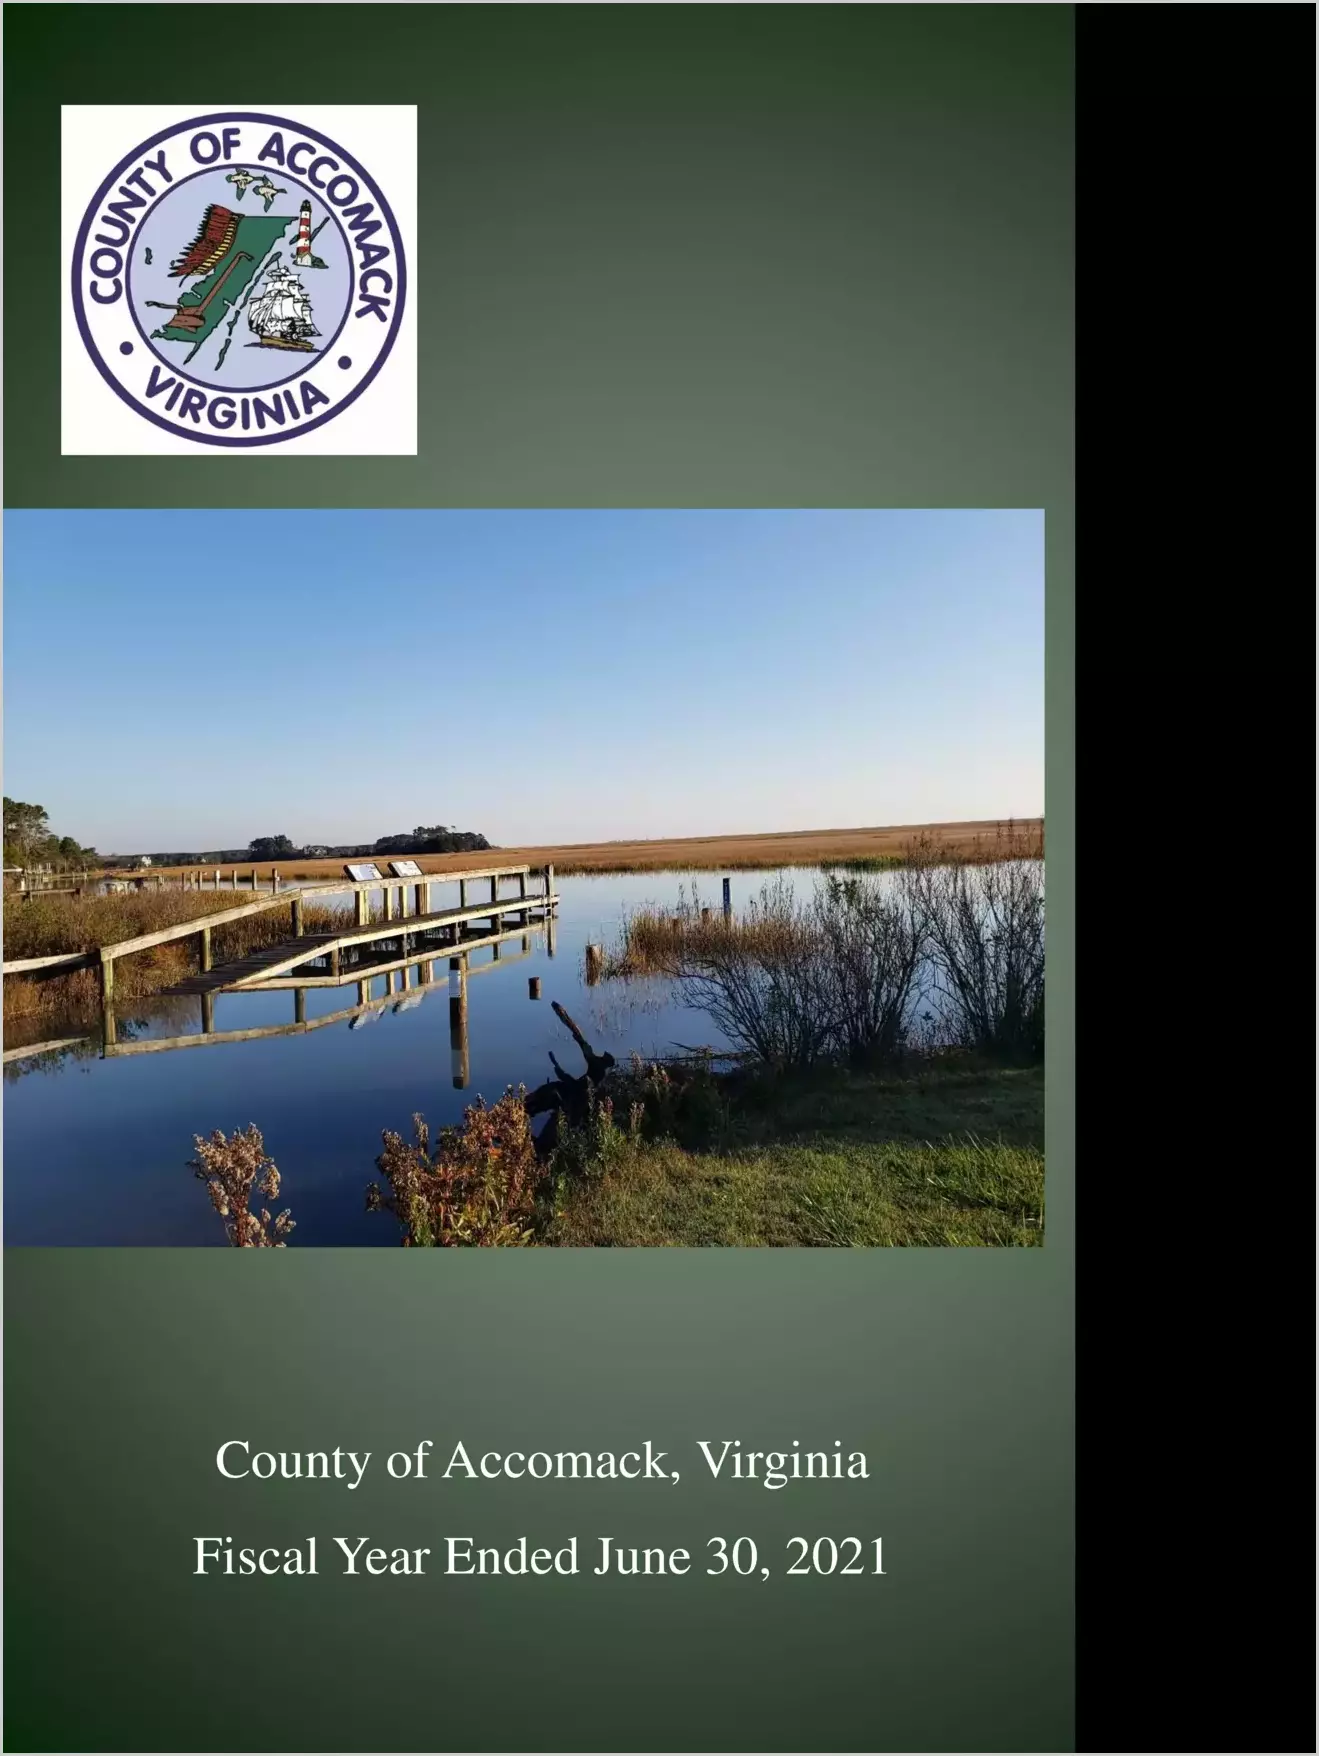 2021 Annual Financial Report for County of Accomack